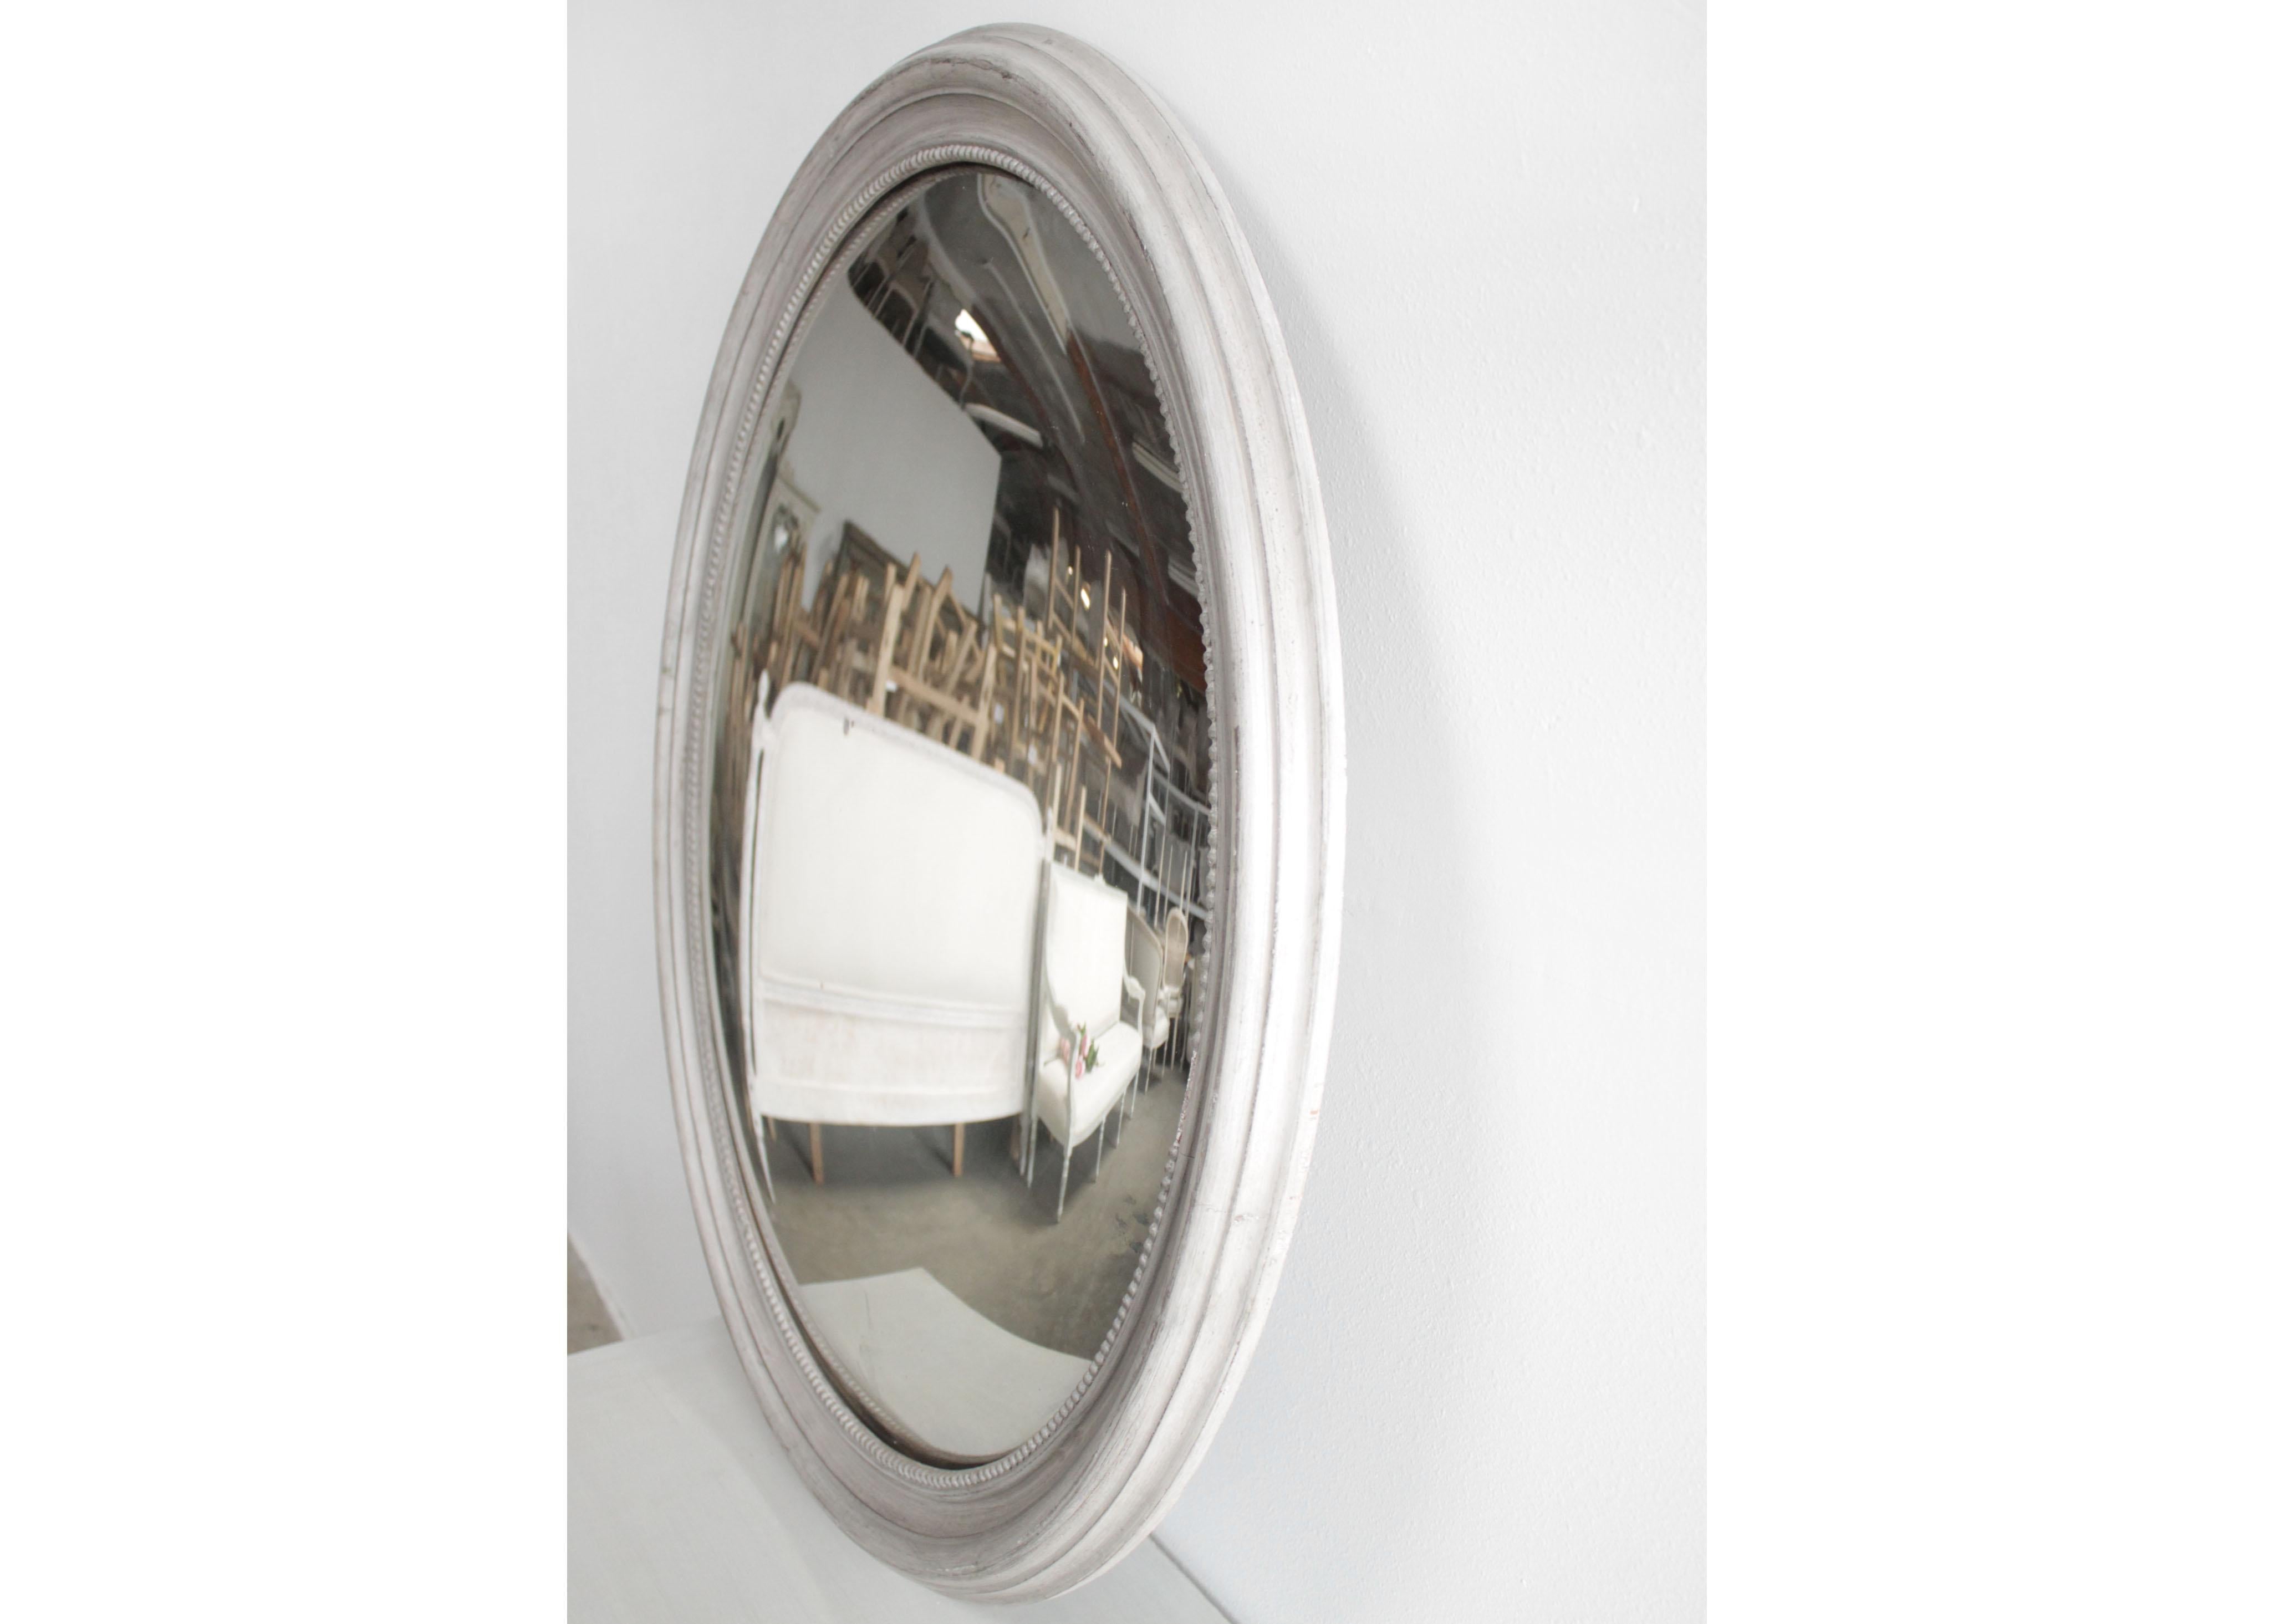 Round convex painted mirror
Painted in a gustavian gray finish, with beaded carvings.
Size: 39